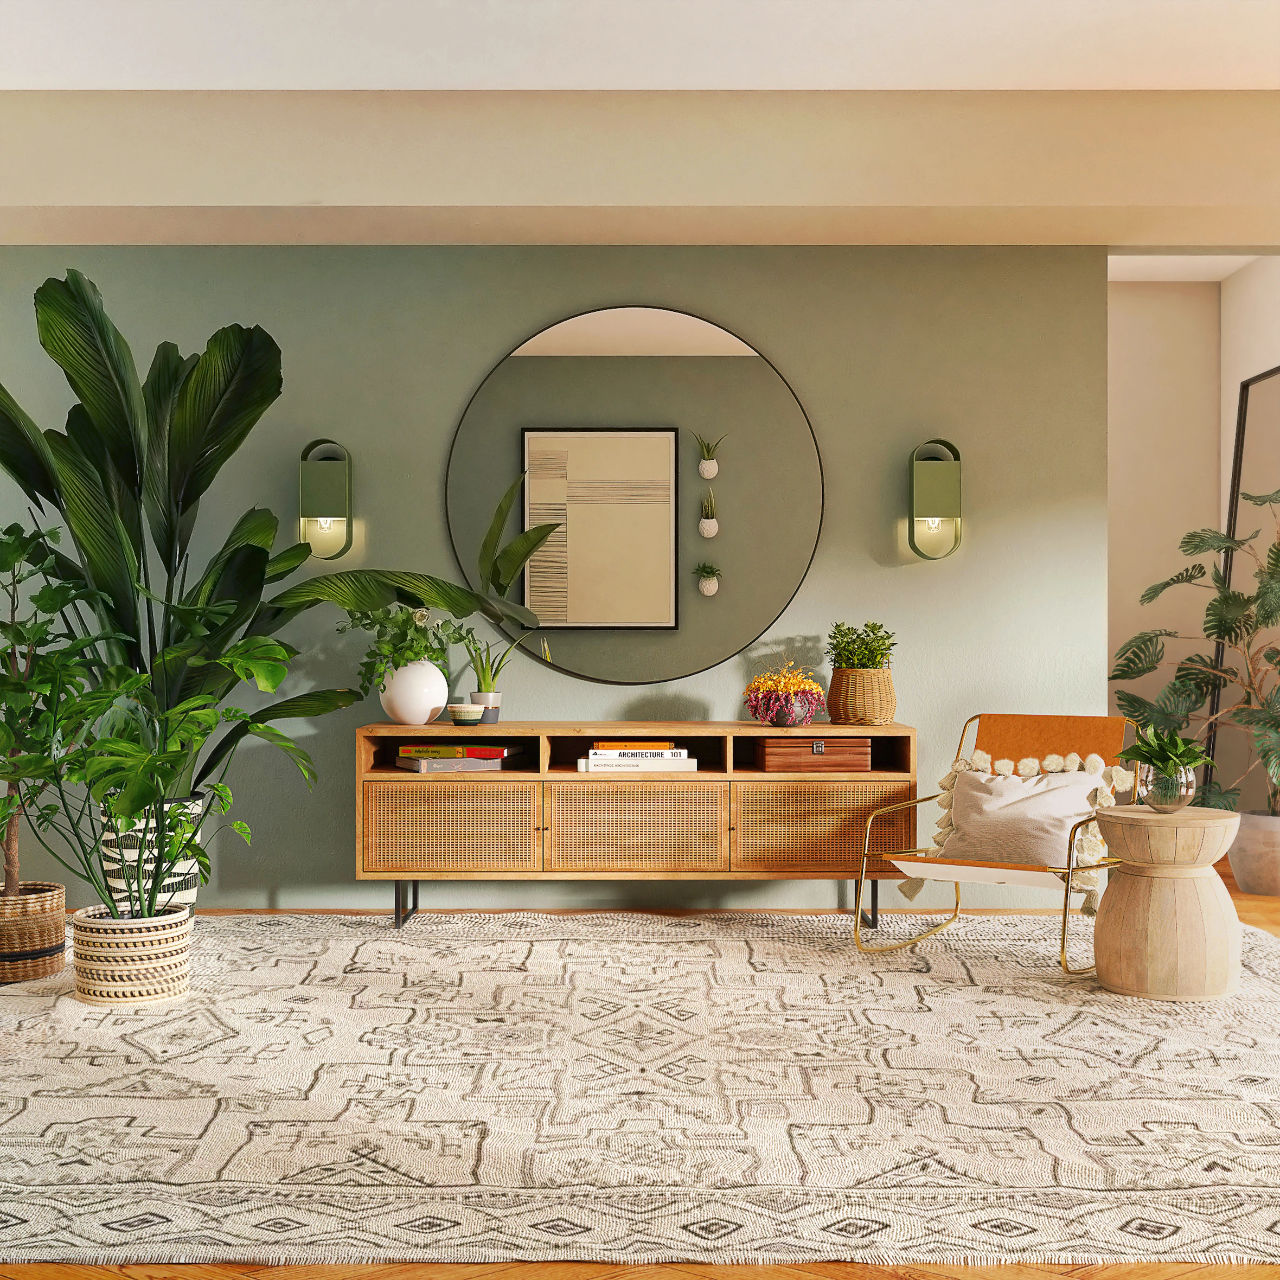 Pale Green Feature Wall to Complement Indoor Plants and Natural Tones